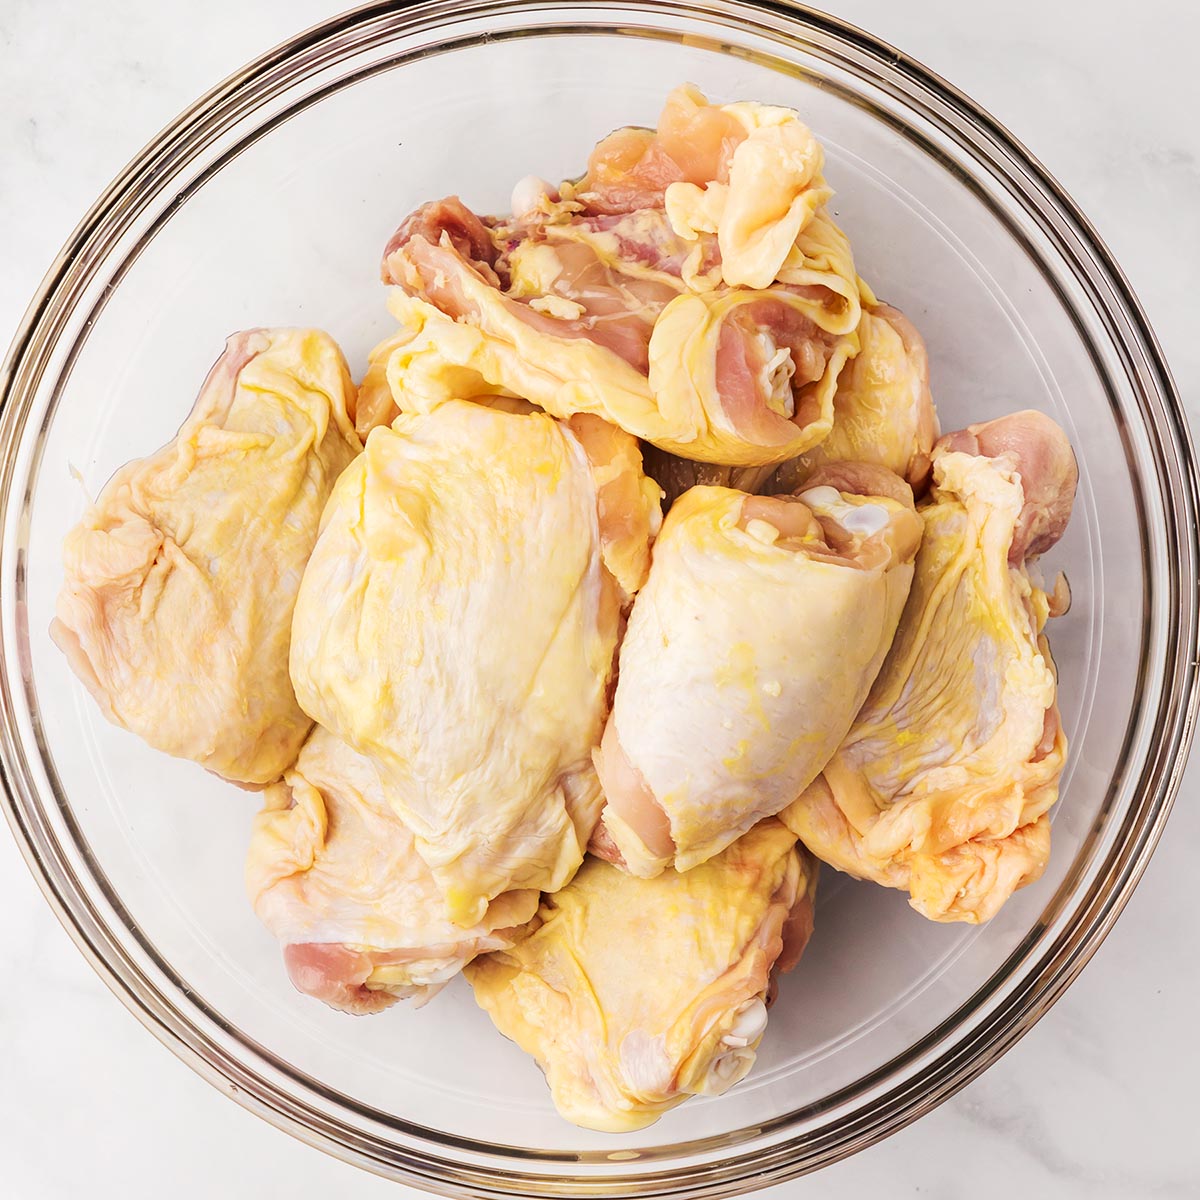 Raw chicken pieces in a mixing bowl.